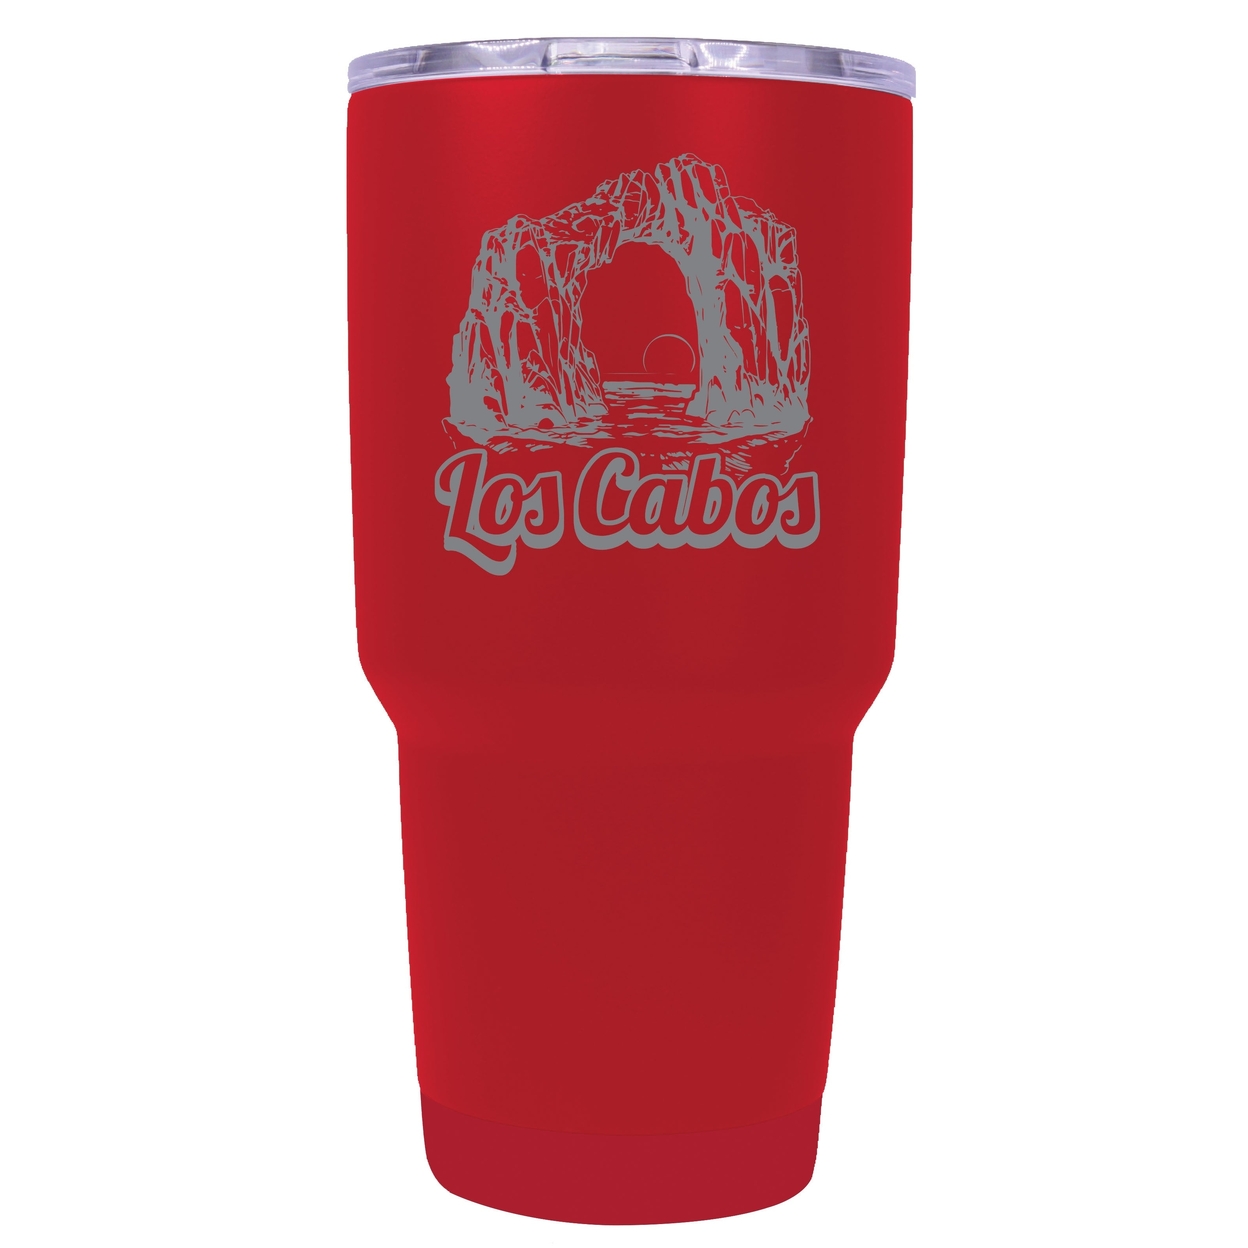 Los Cabos Mexico Souvenir 24 Oz Engraved Insulated Stainless Steel Tumbler - Coral,,Single Unit